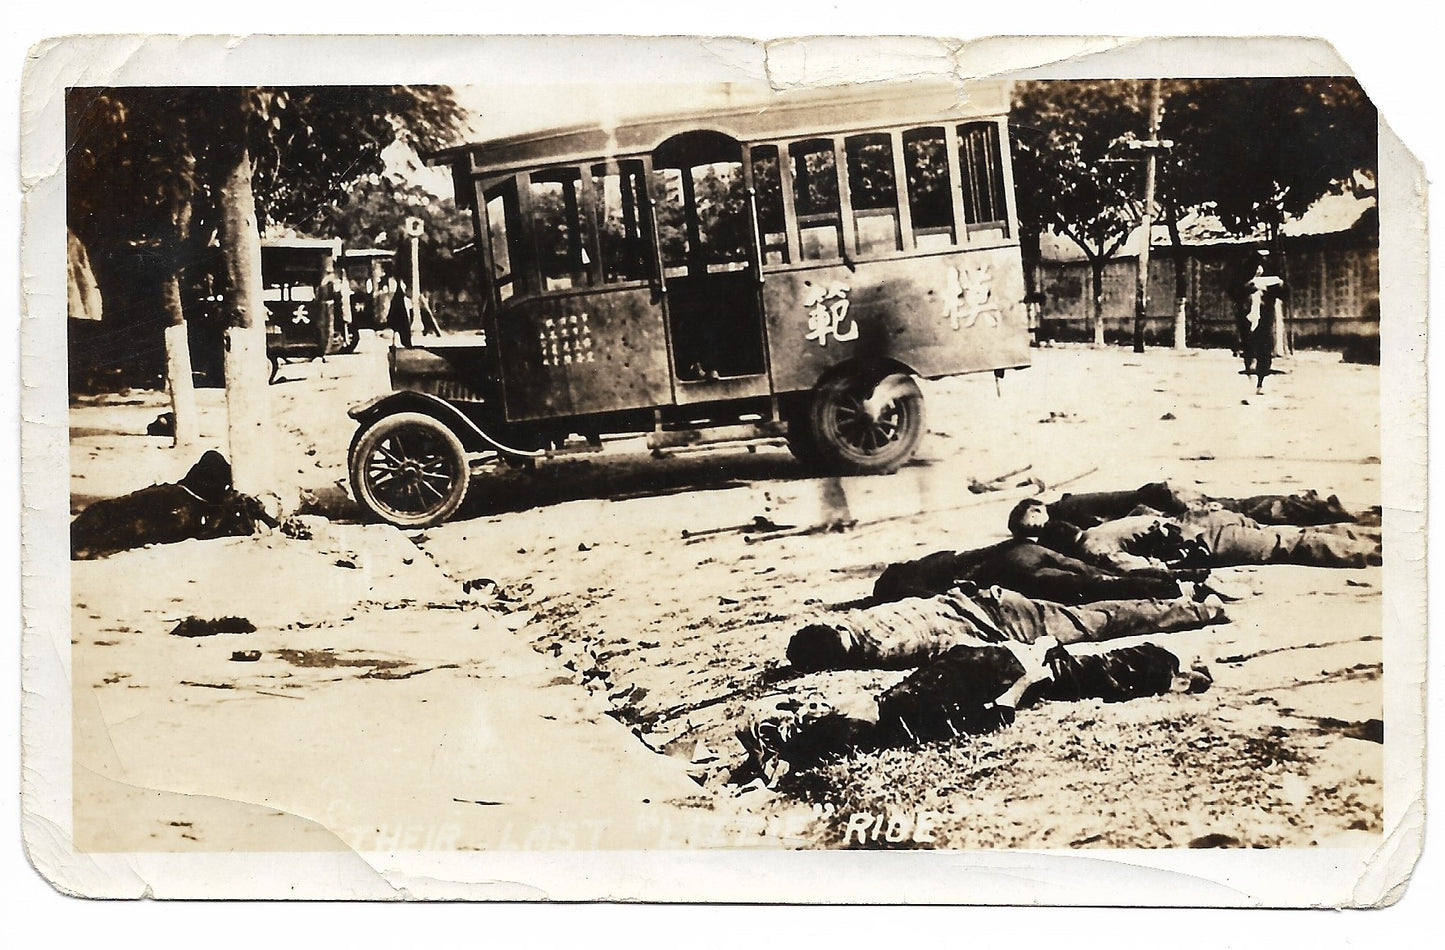 Chinese Execution Photo #7 - Dead Victims by Car